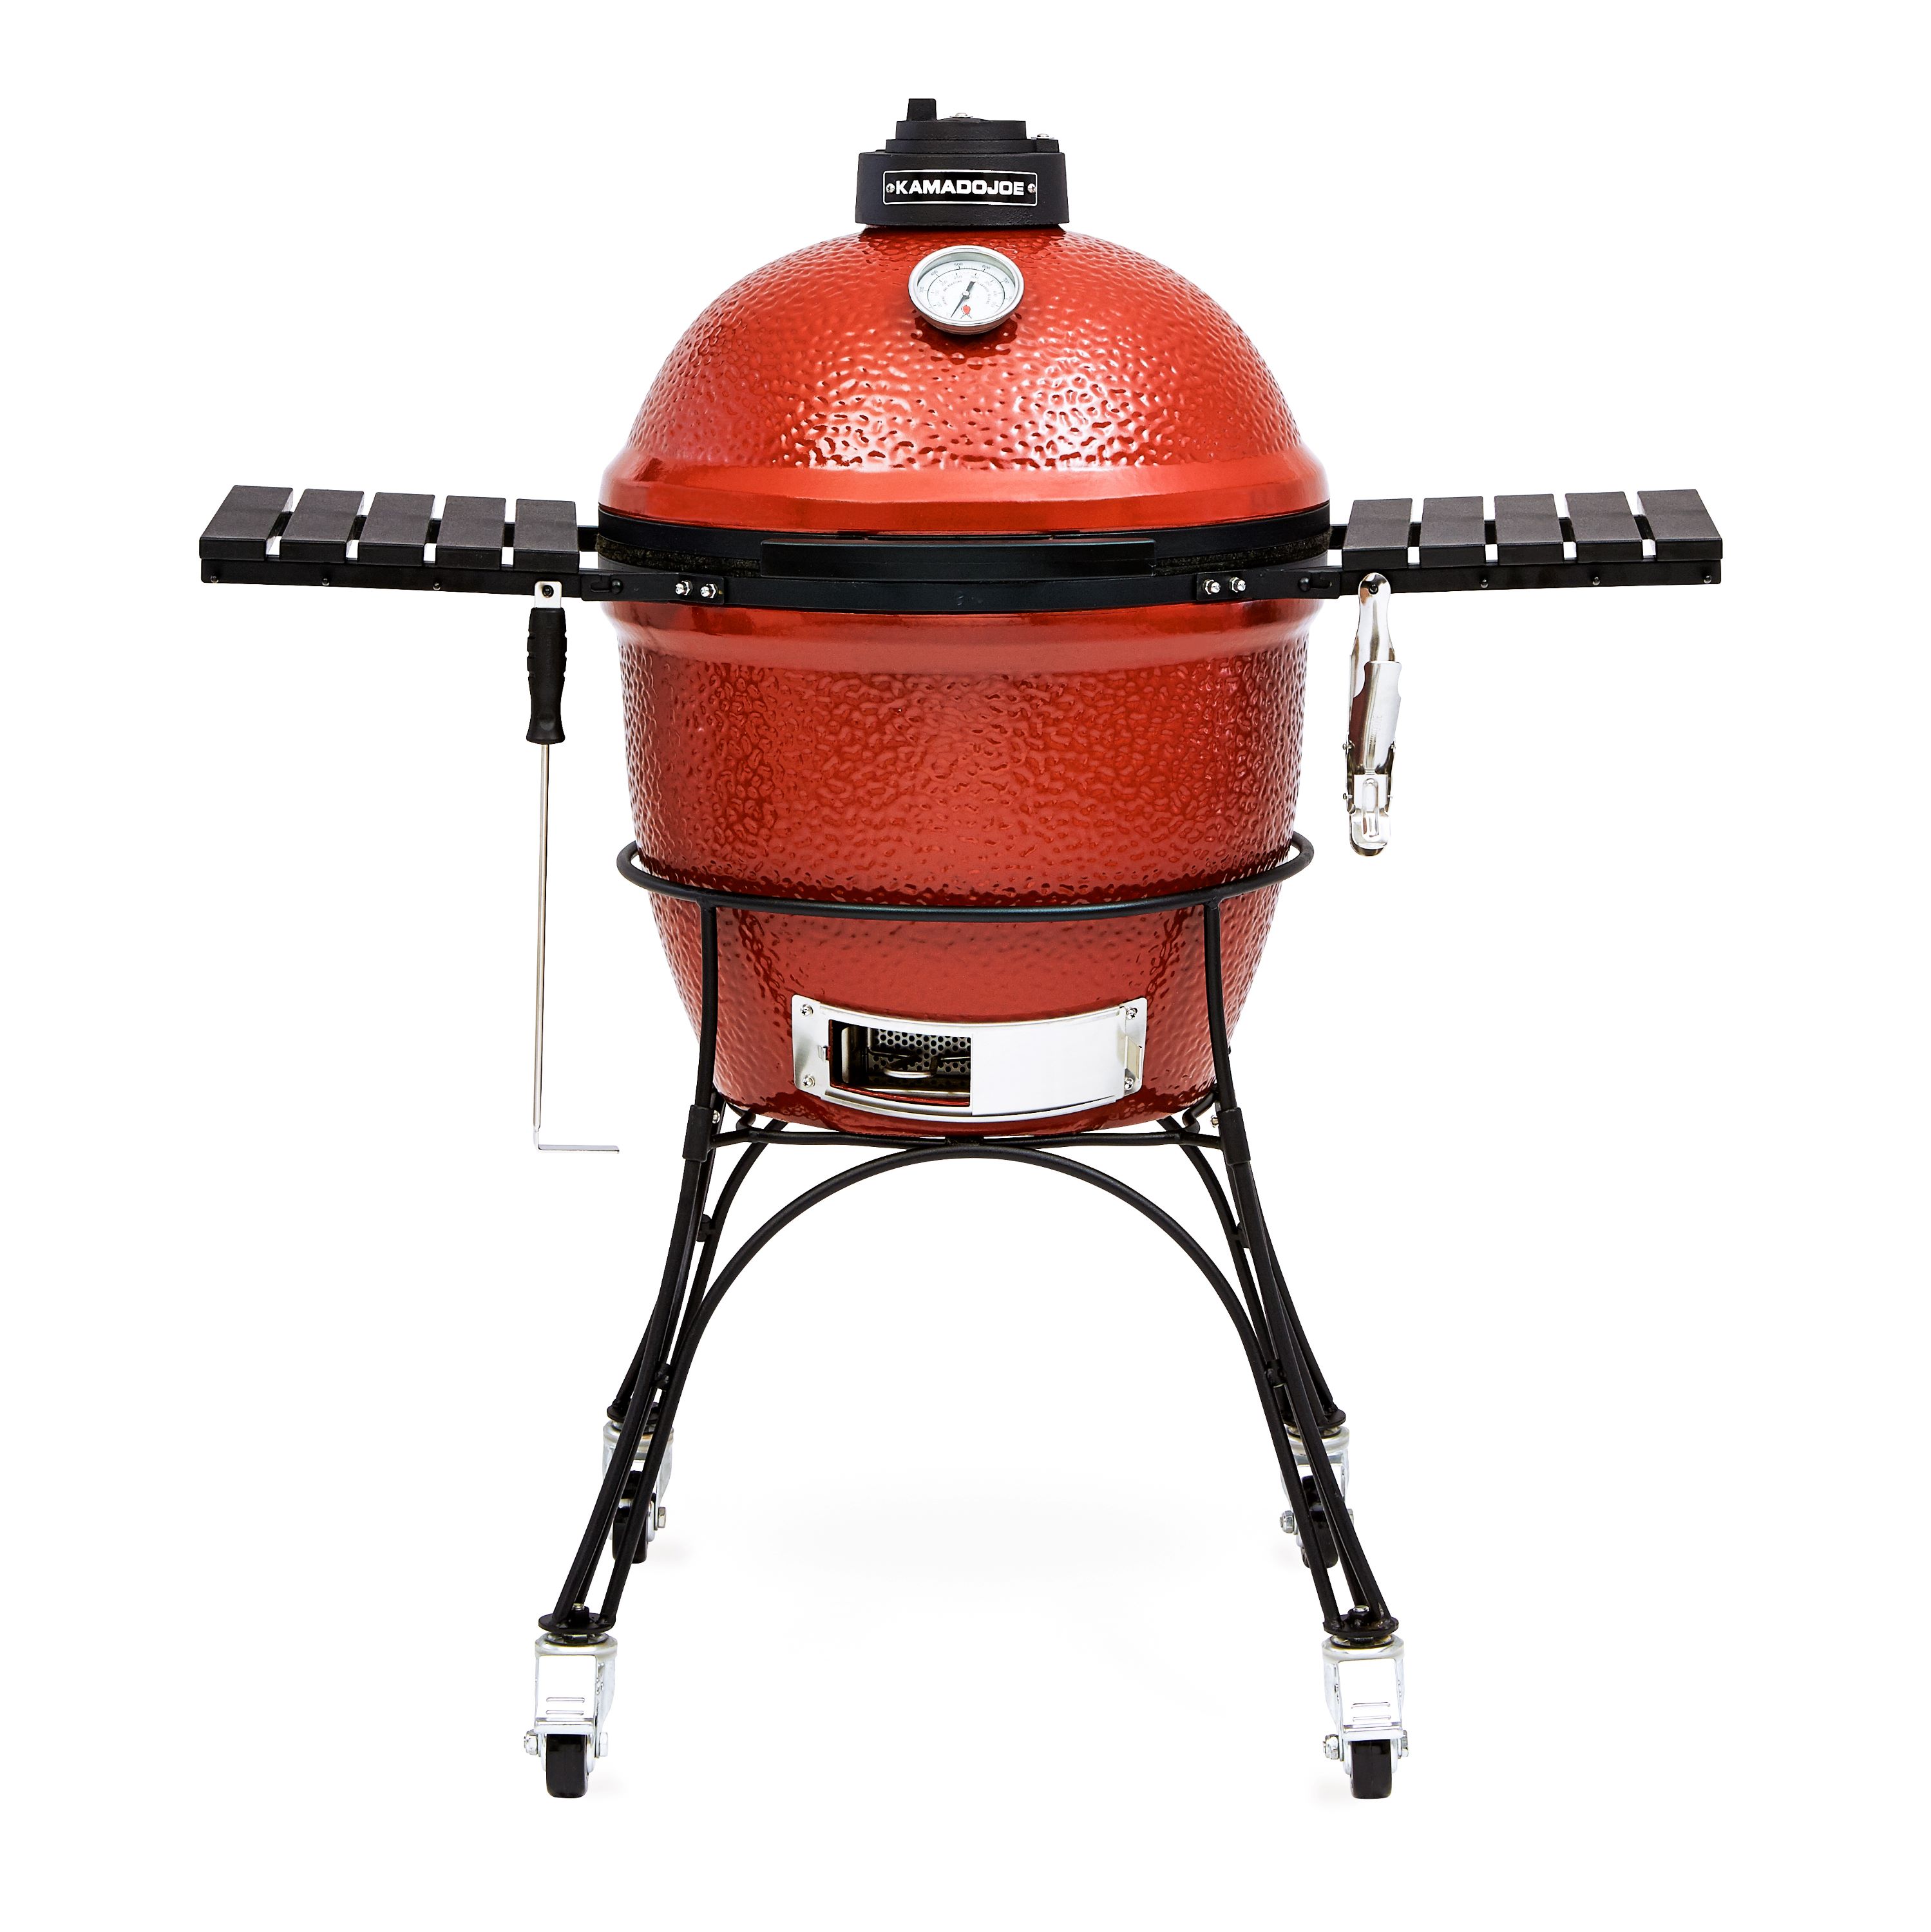 Classic Joe I 18 in. Charcoal Grill in Red with Cart, Side Shelves, Grill Gripper, and Ash Tool - image 1 of 12